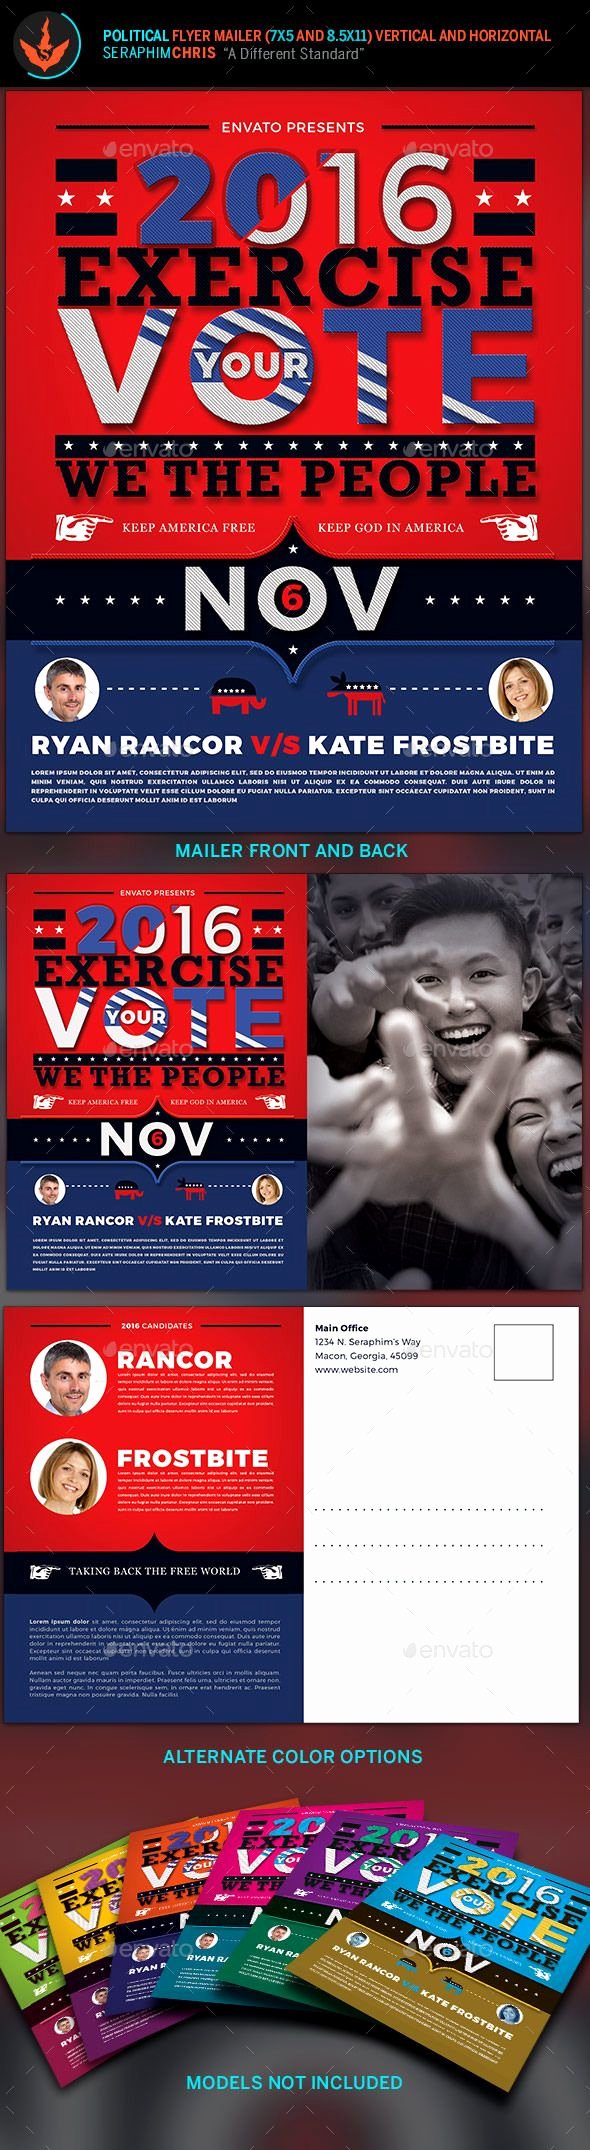 Political Mailers Template Fresh 13 Best Free Political Campaign Flyer Templates Images On